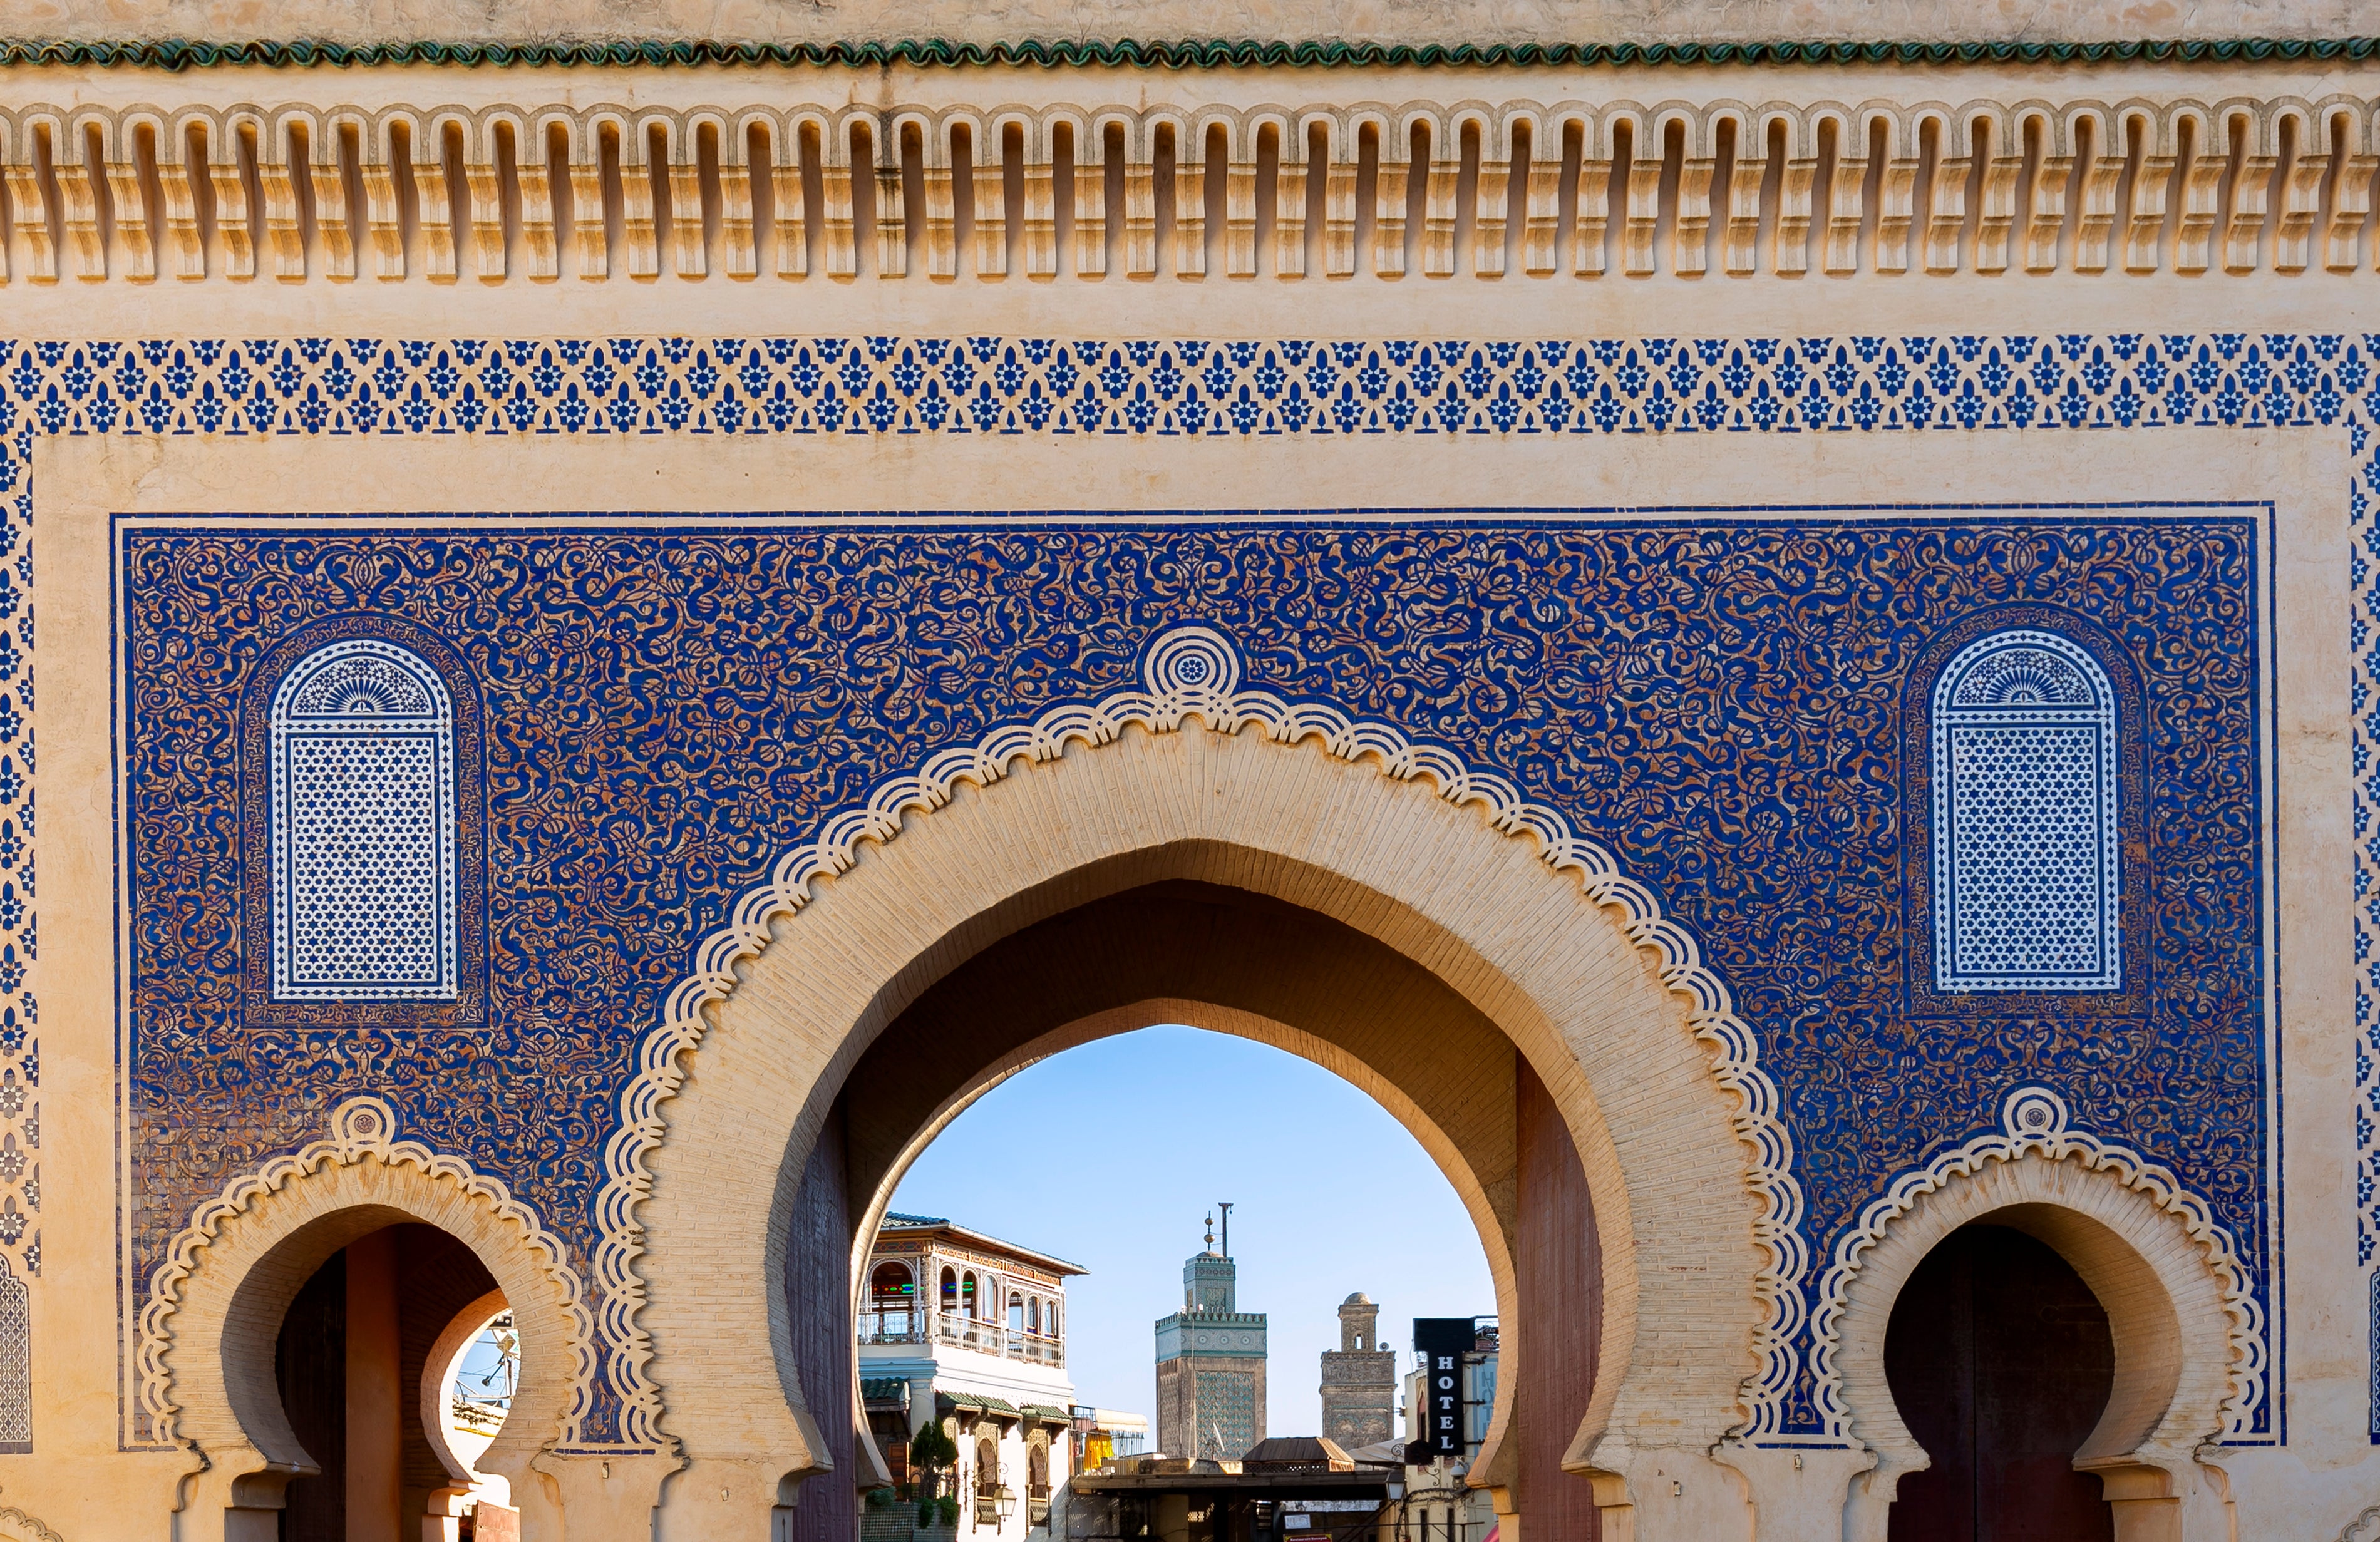 The intricate architecture and Unesco landmarks beg to be photographed in Fes